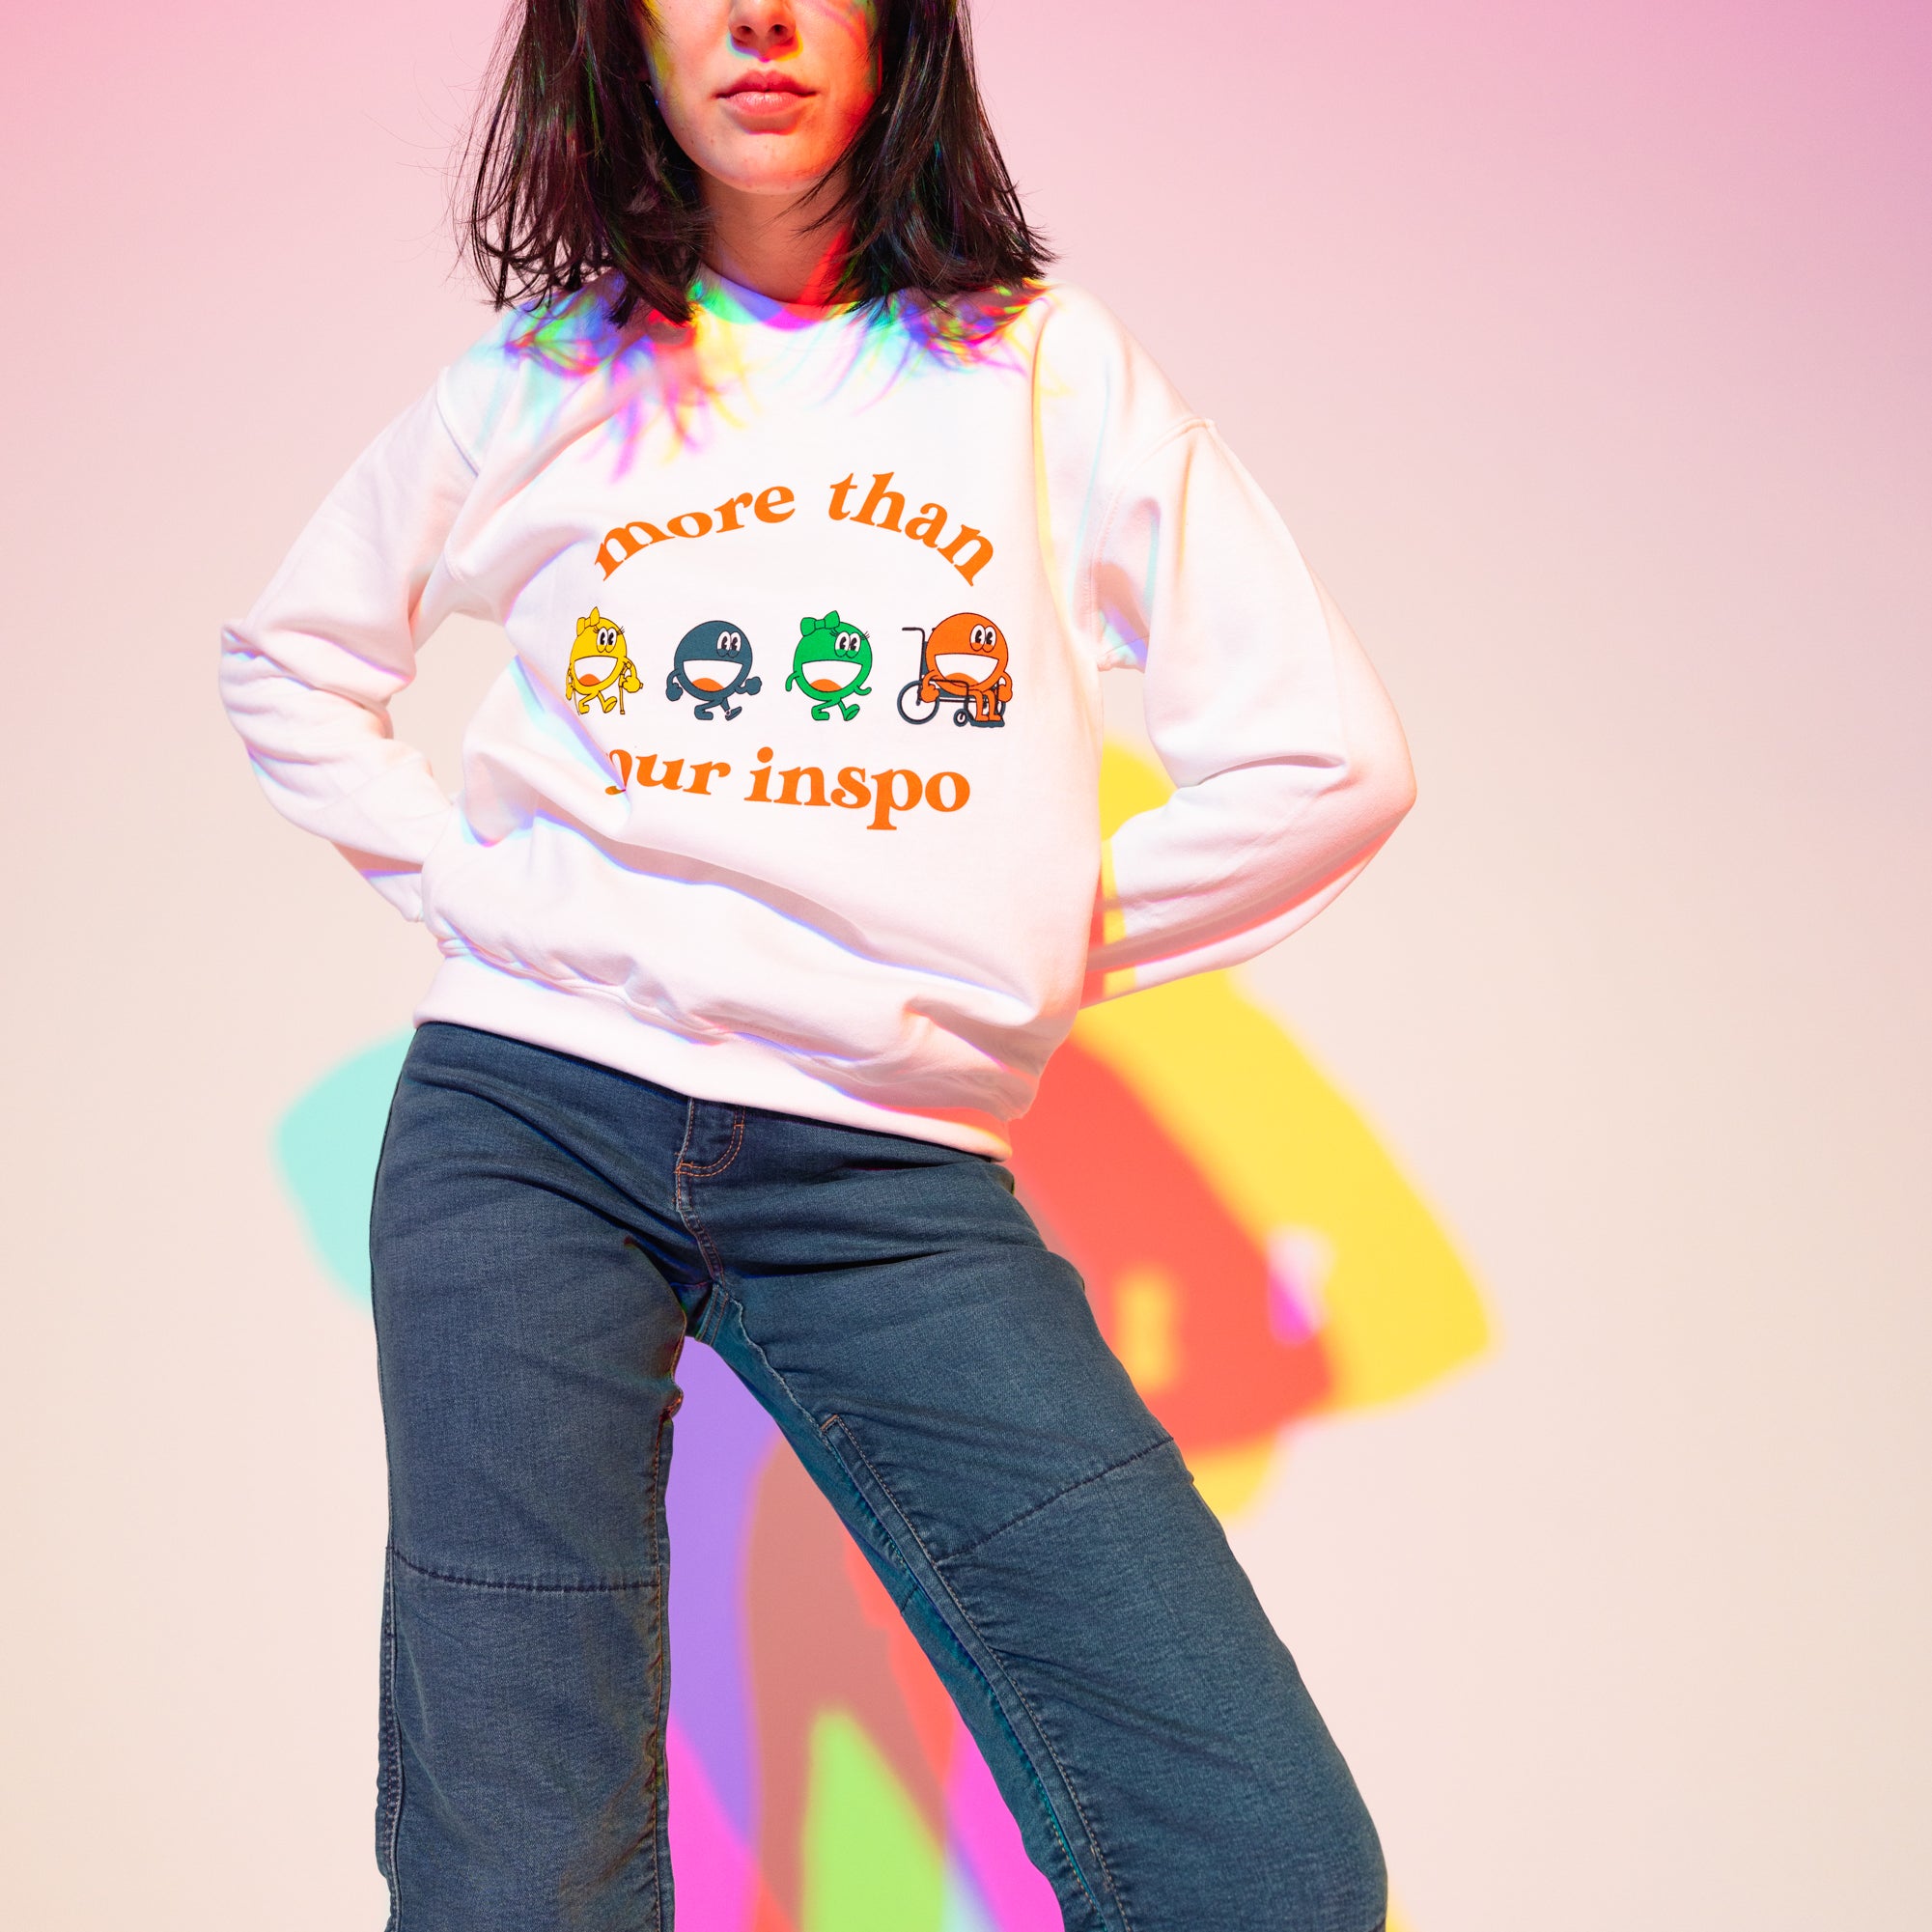 Sophia (A Latina woman with long black hair) poses in front of a white wall. There are outlines behind her that are light blue, purple, pink, and yellow. She is wearing a white sweater that says “not your inspo with the four No Limbits crew members (Colorful circles with forearm crutches, a prosthetic leg, and a wheelchair), and denim jeans.